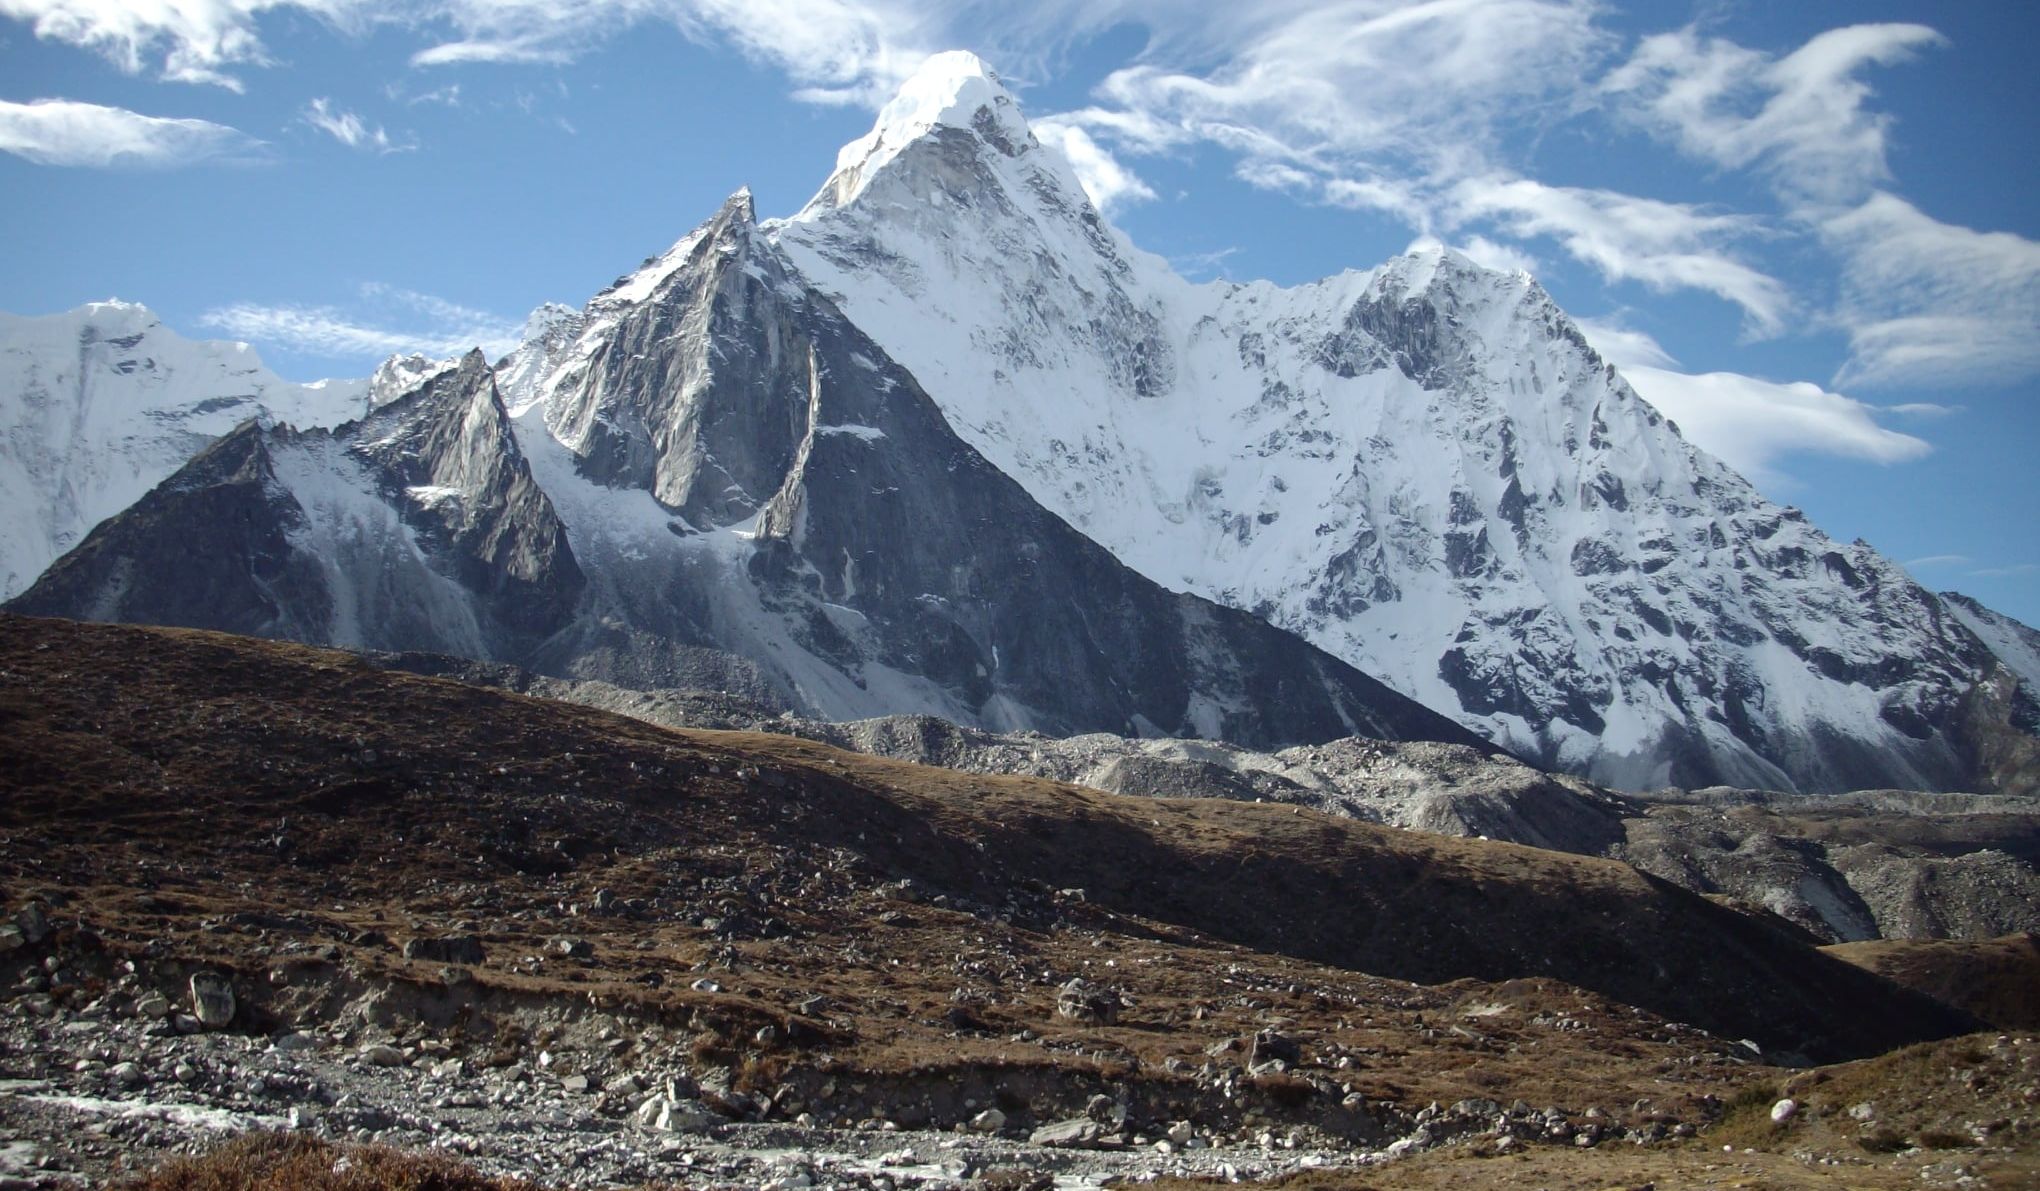 Ama Dablam above the Chhukung Valley